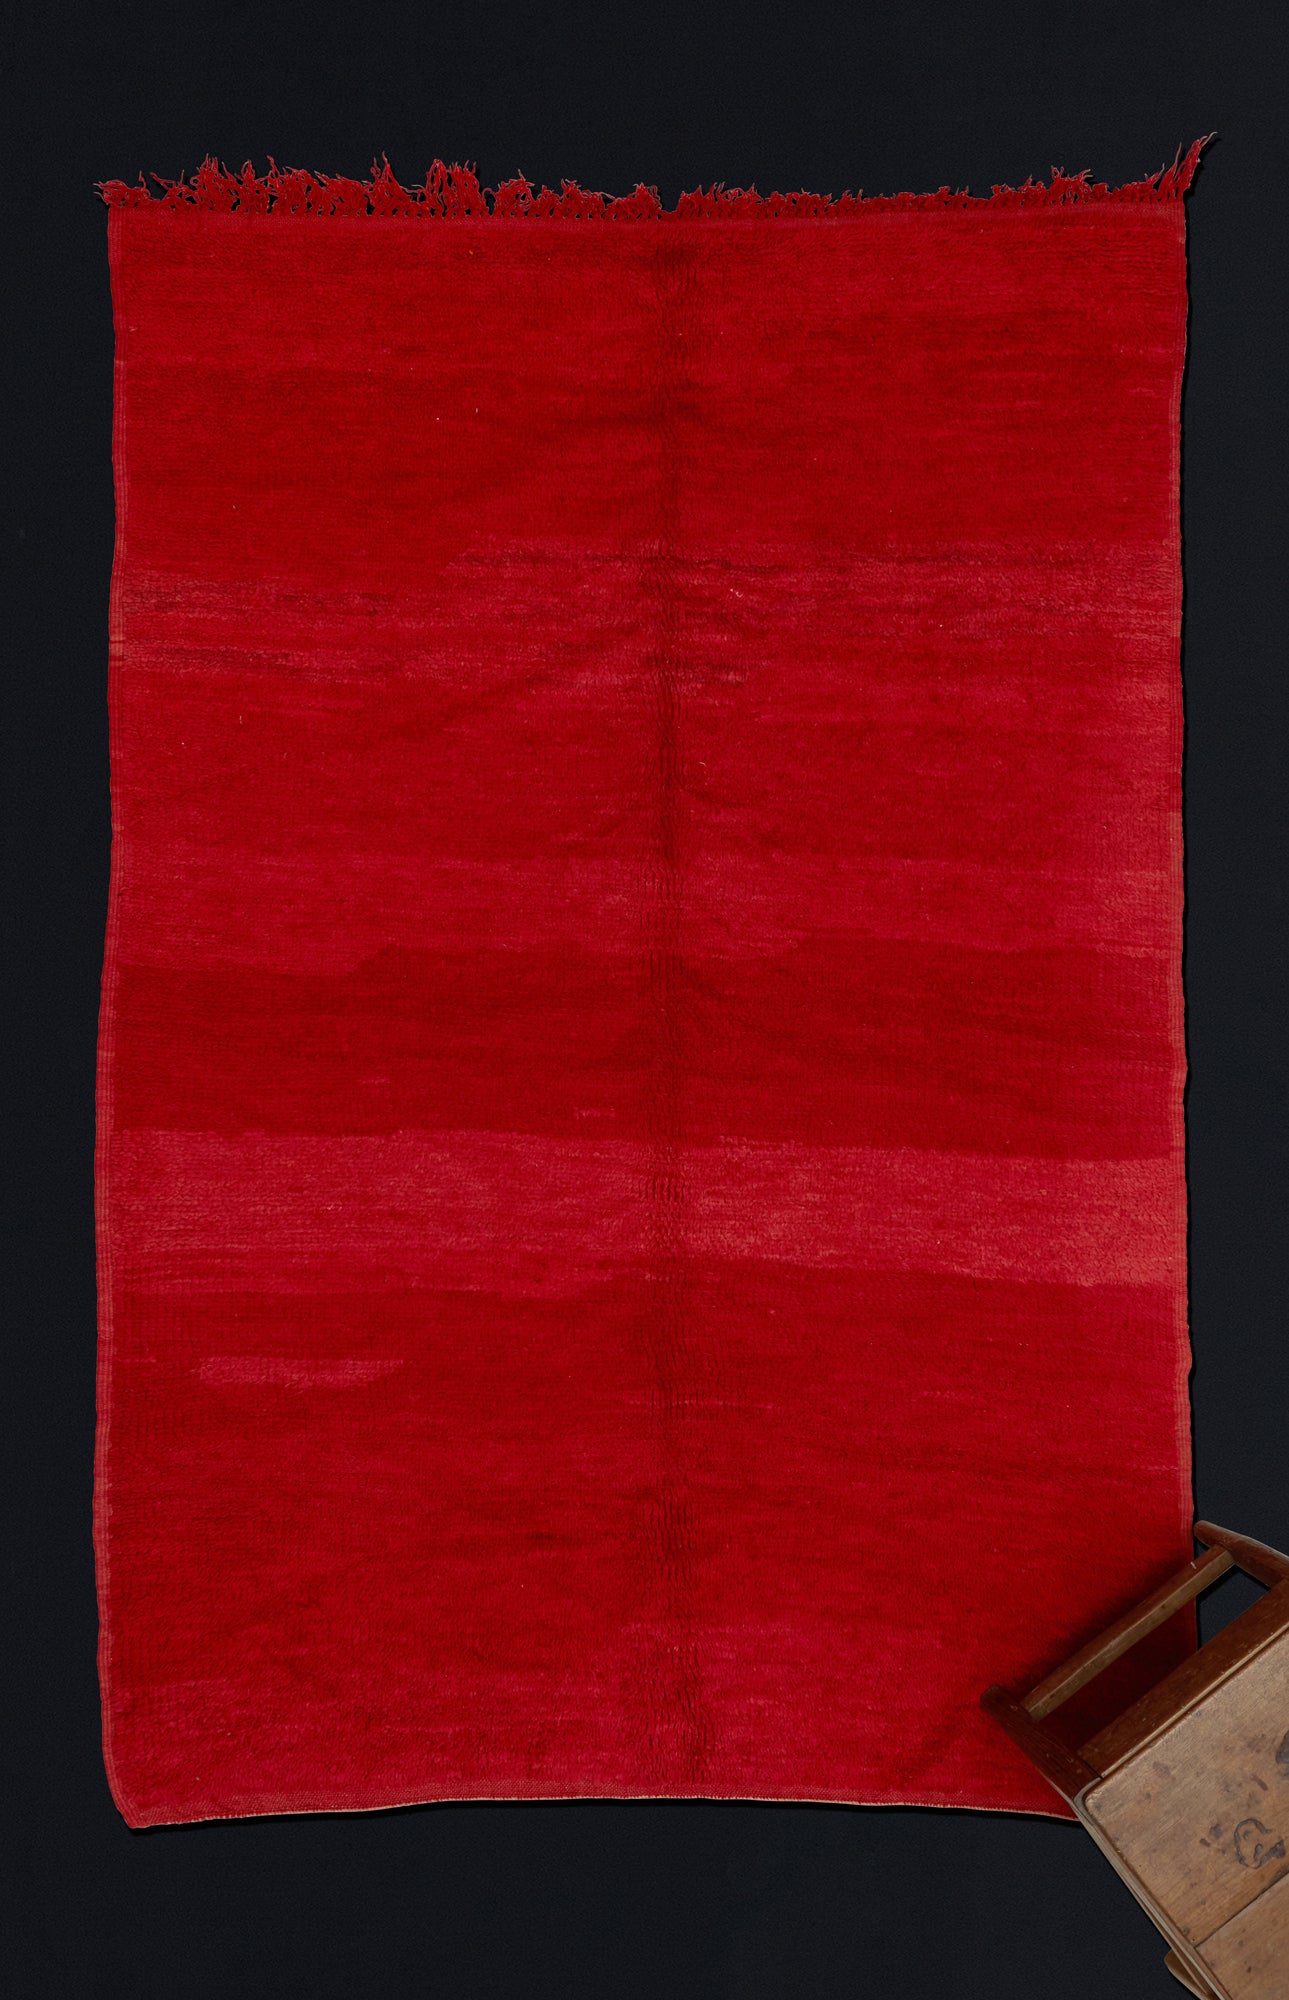 Medium Sized All Red Chichaoua Carpet ...................(5' 6'' x 8')